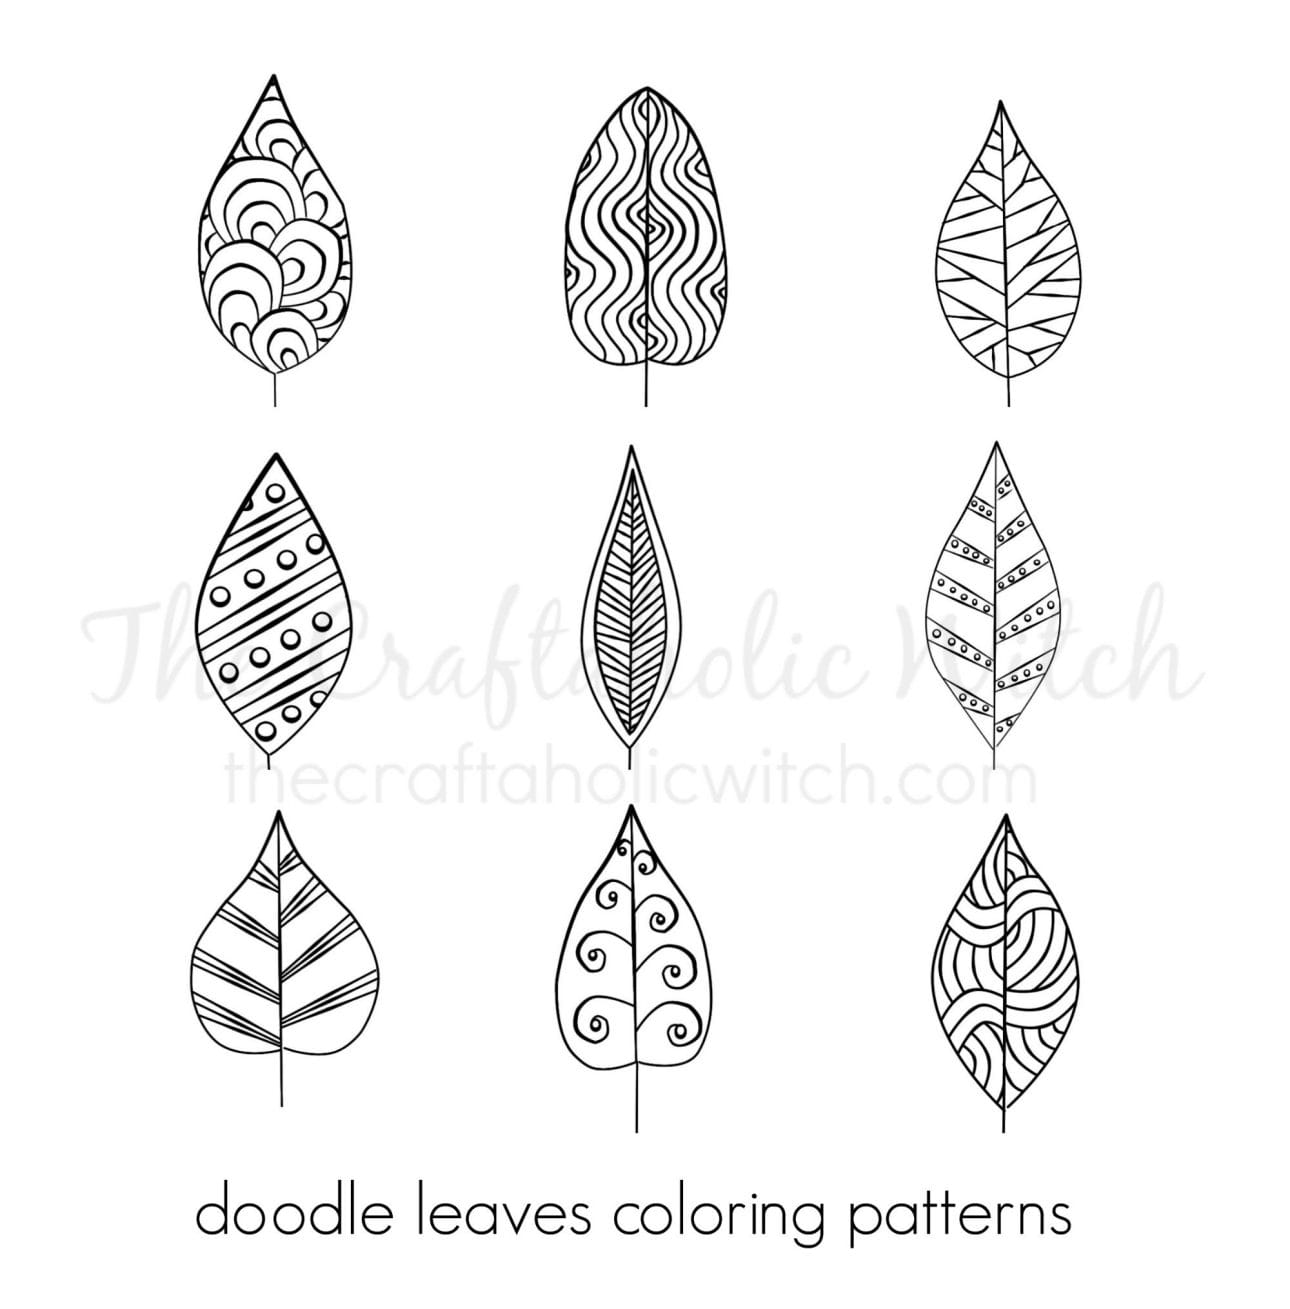 Free Doodle Leaf Patterns and Coloring Pages